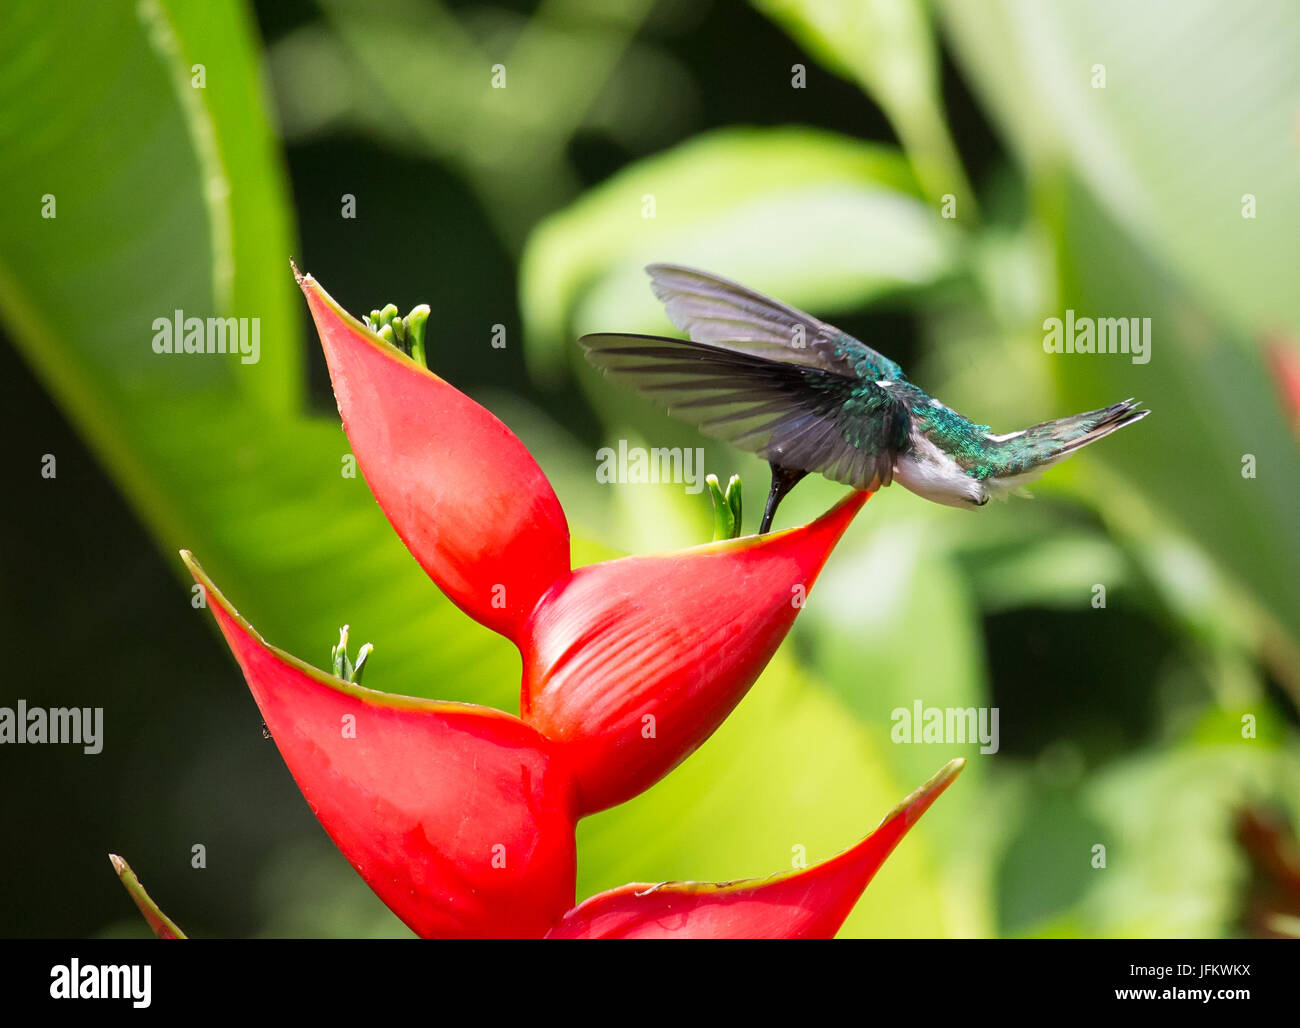 White-necked Jacobin Hummingbird drinking nectar from a Heliconia flower Stock Photo